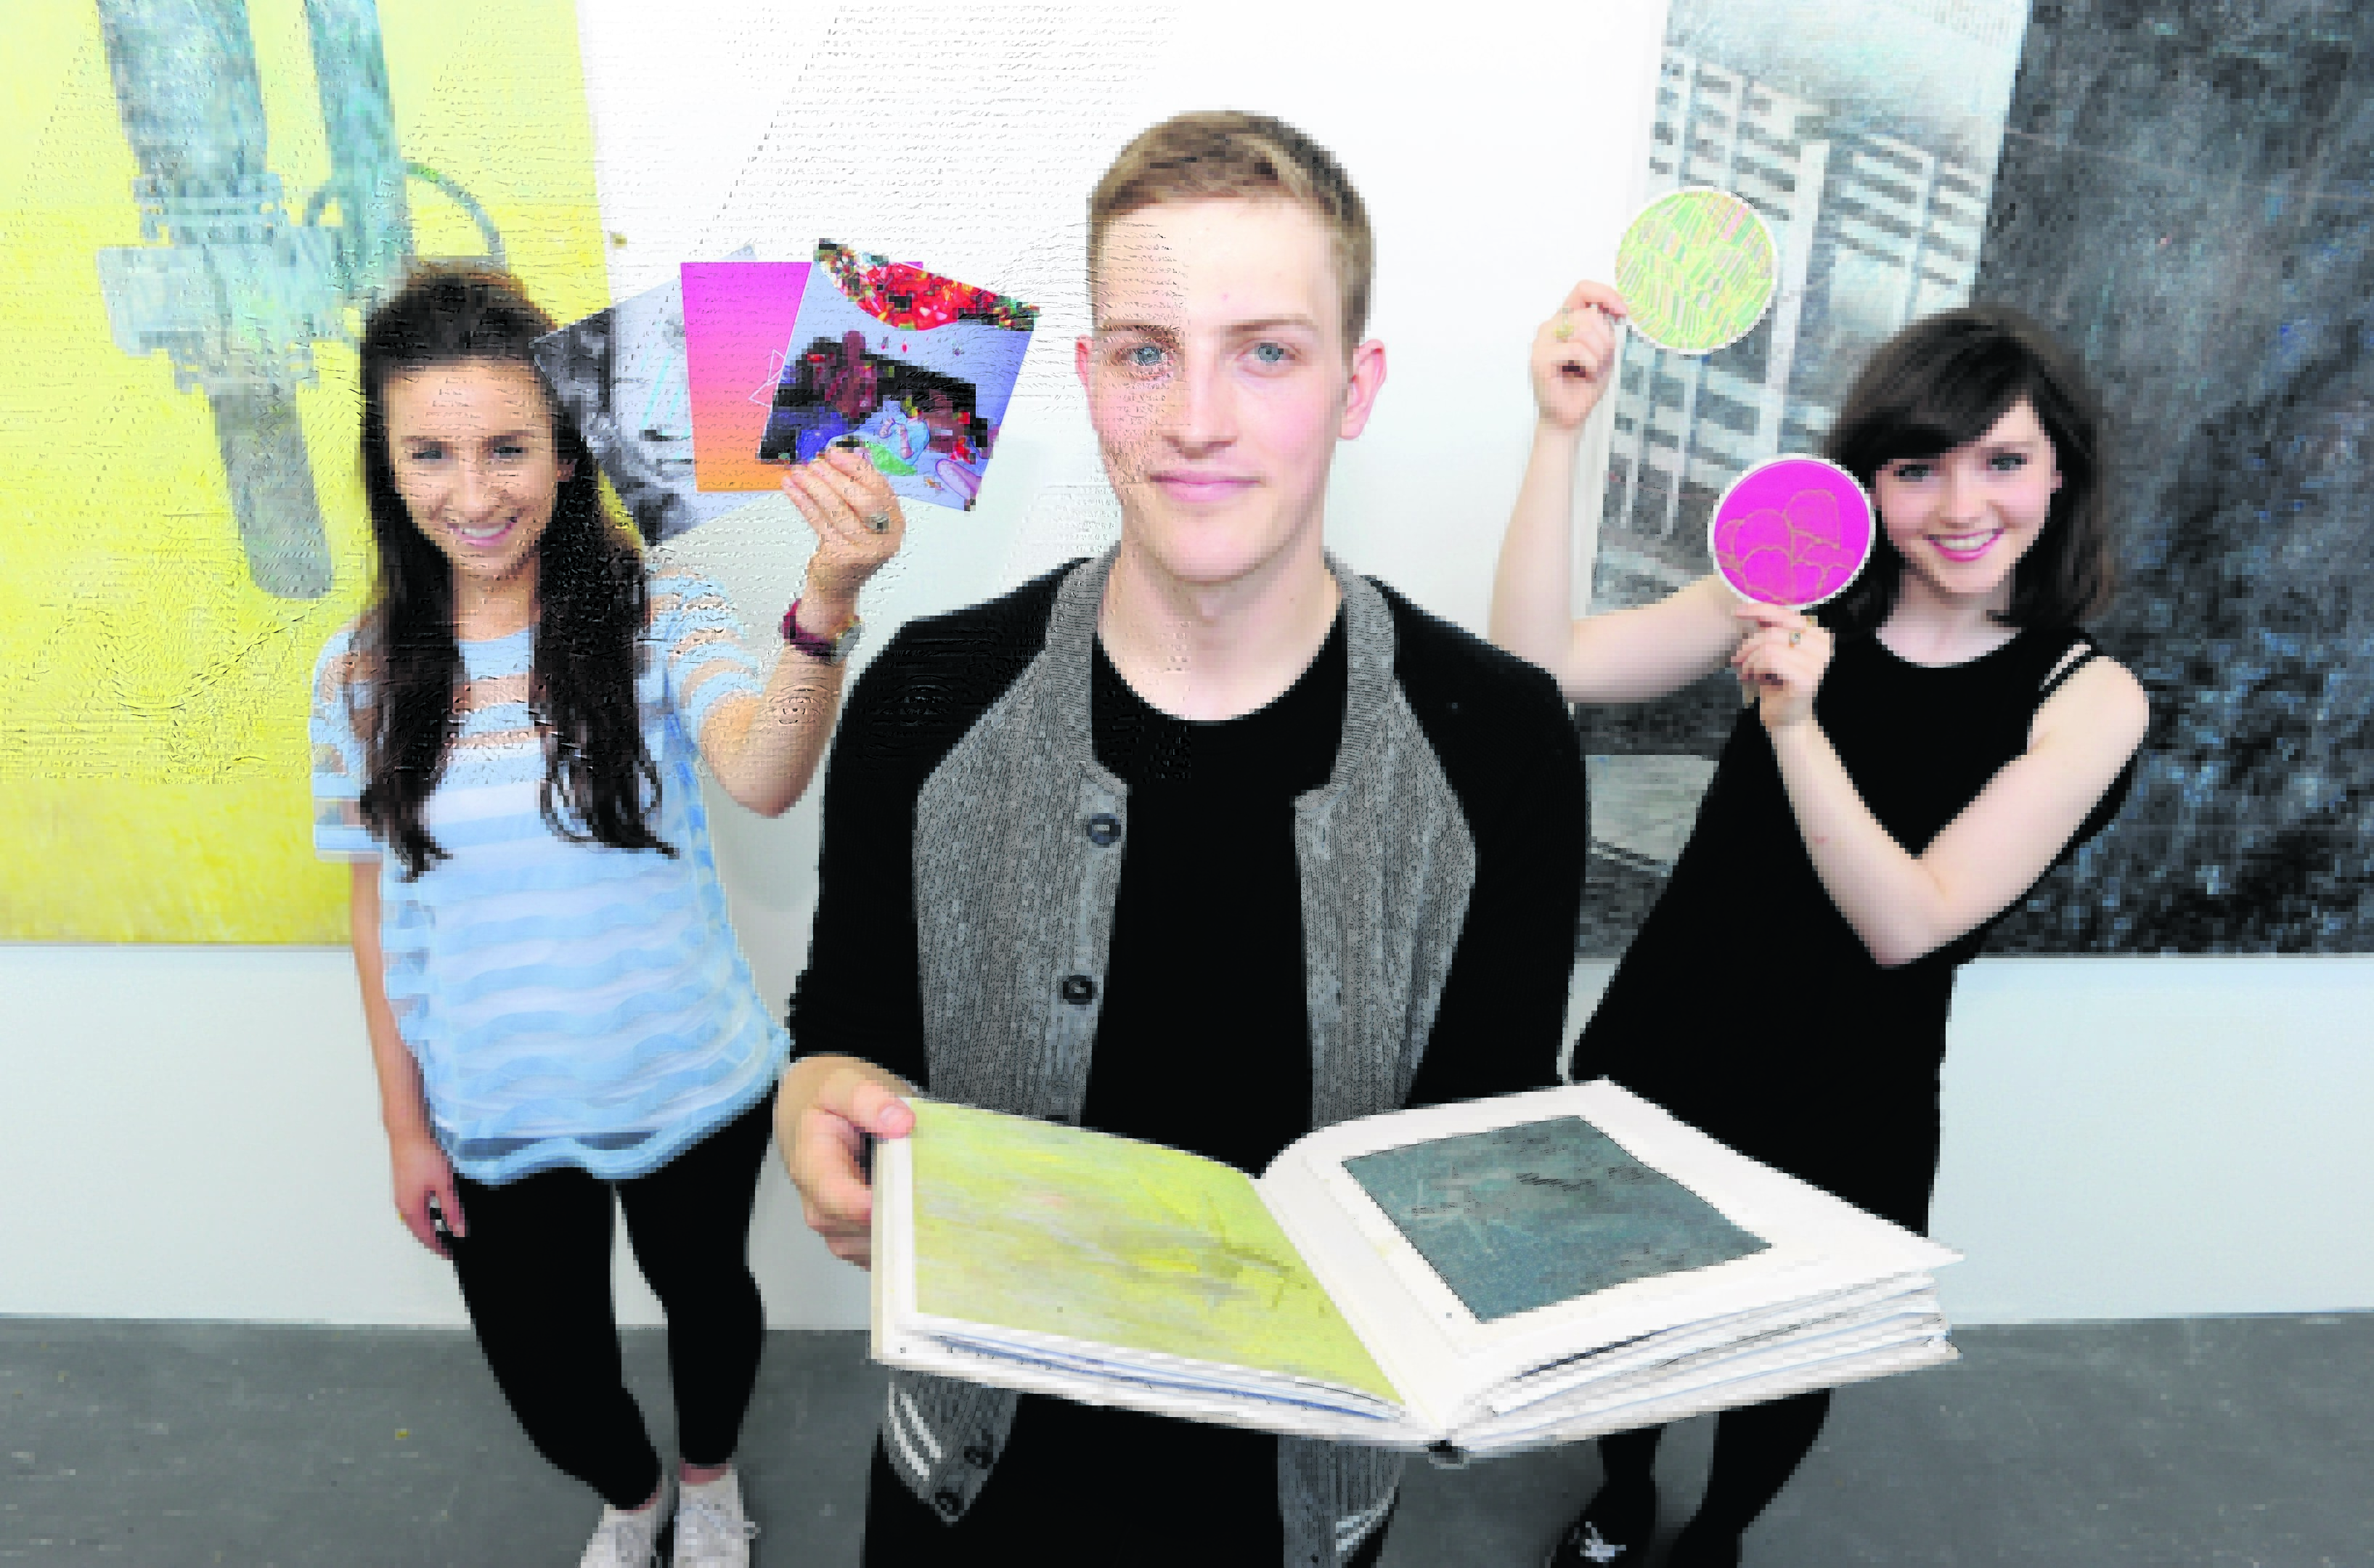 Gray's School of Art students Caterina Bianchini, Jonathon Whitson and Rachel Goldie with some of their work-in-progress ahead of the 2014 degree show.